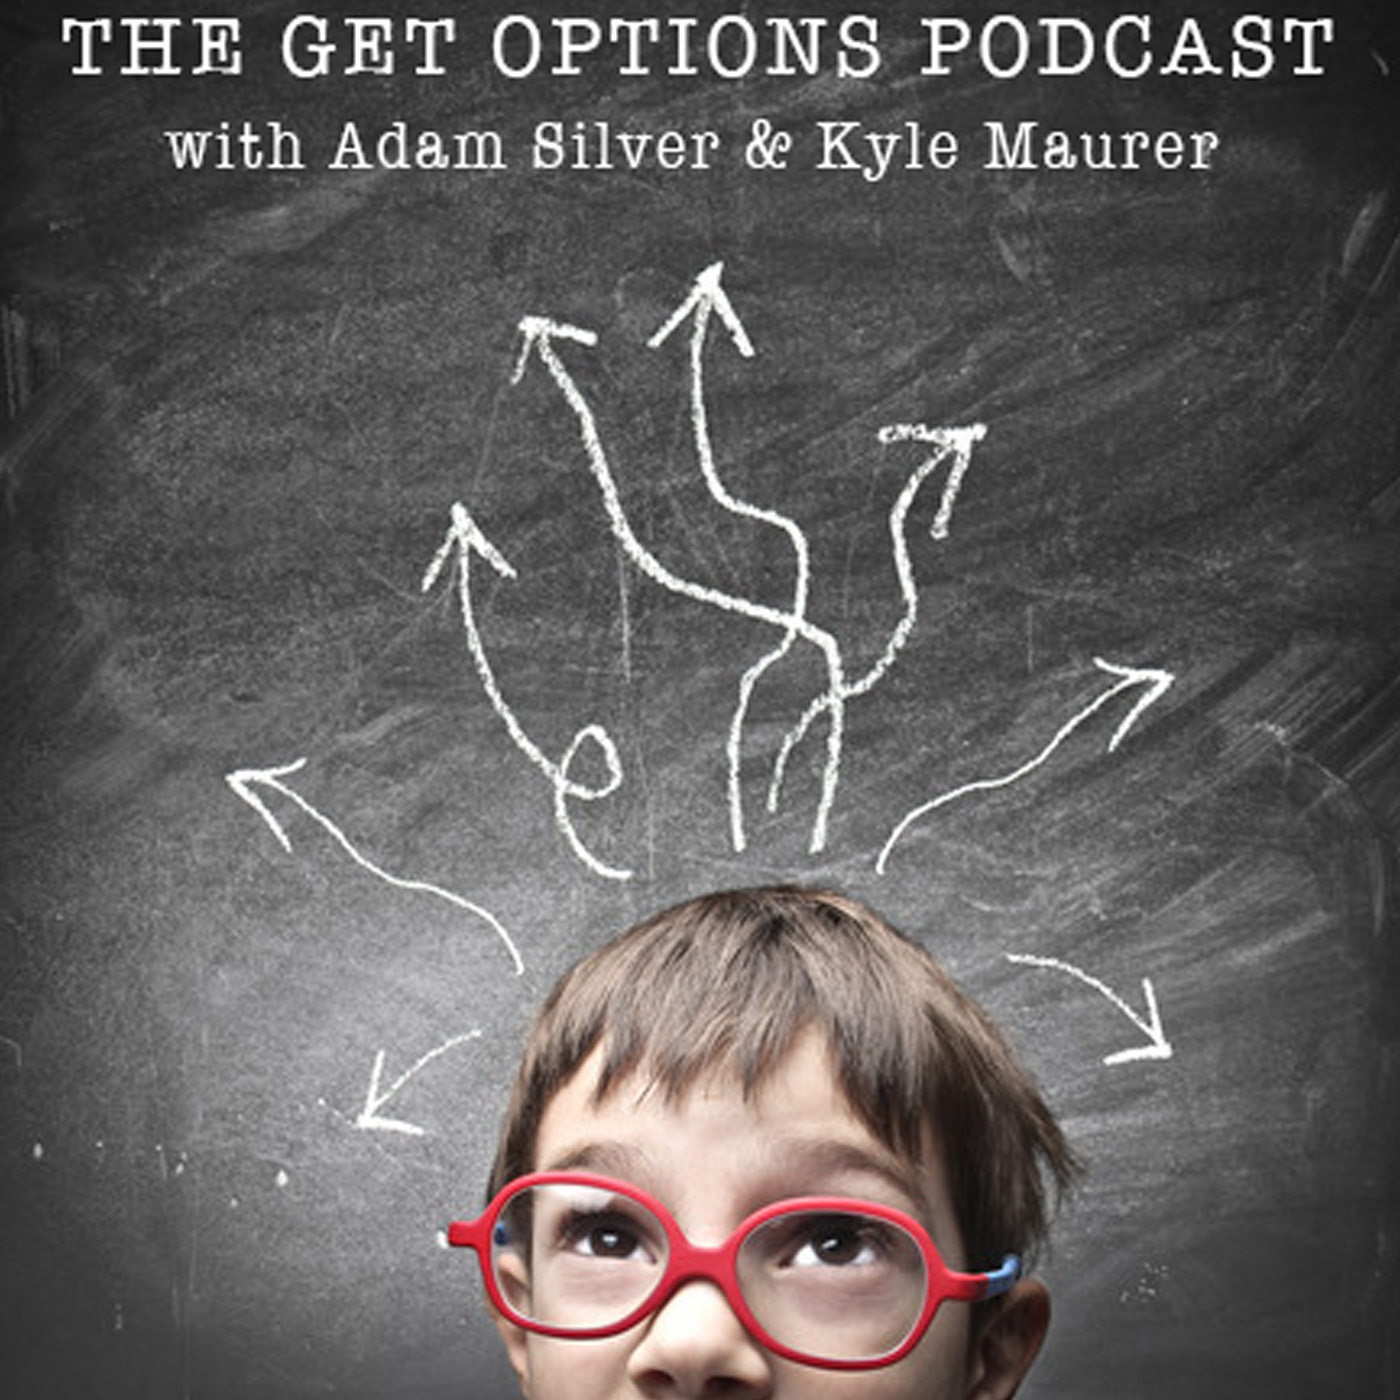 Podcast E142: Options on dealing with workplace drama